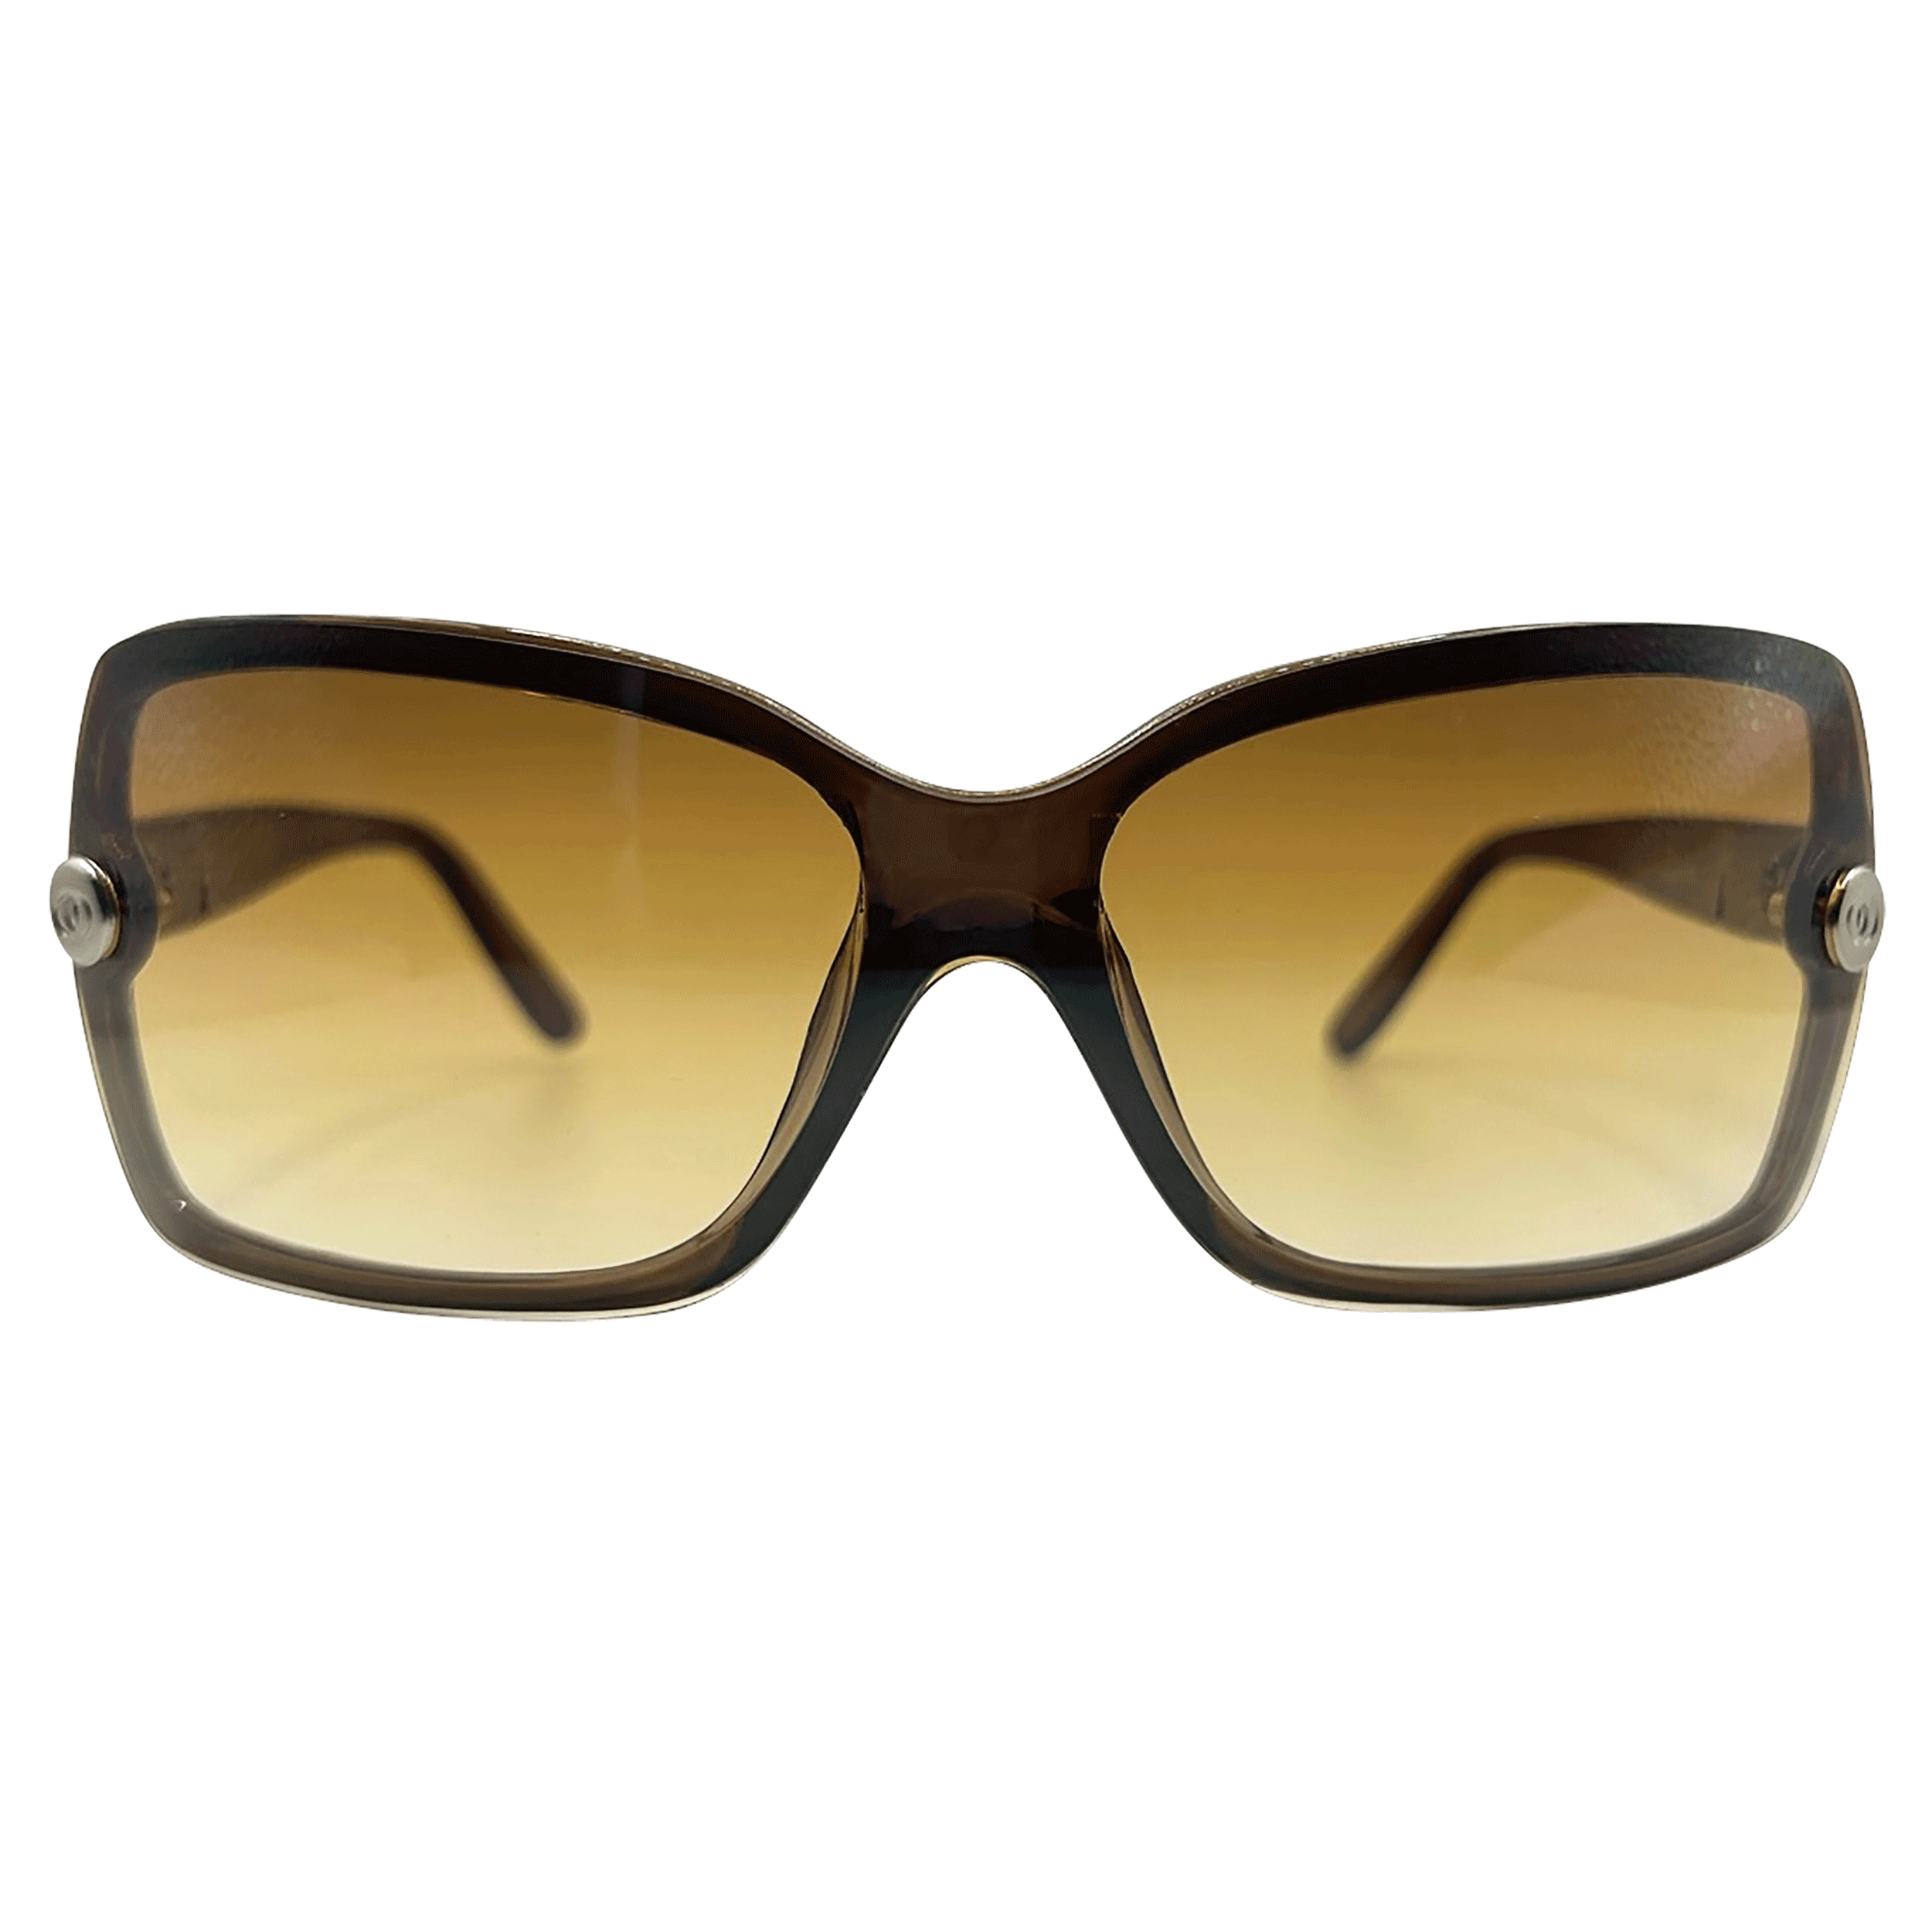 Shop Try Me Shield Vintage Fashion Sunglasses Jelly Brown